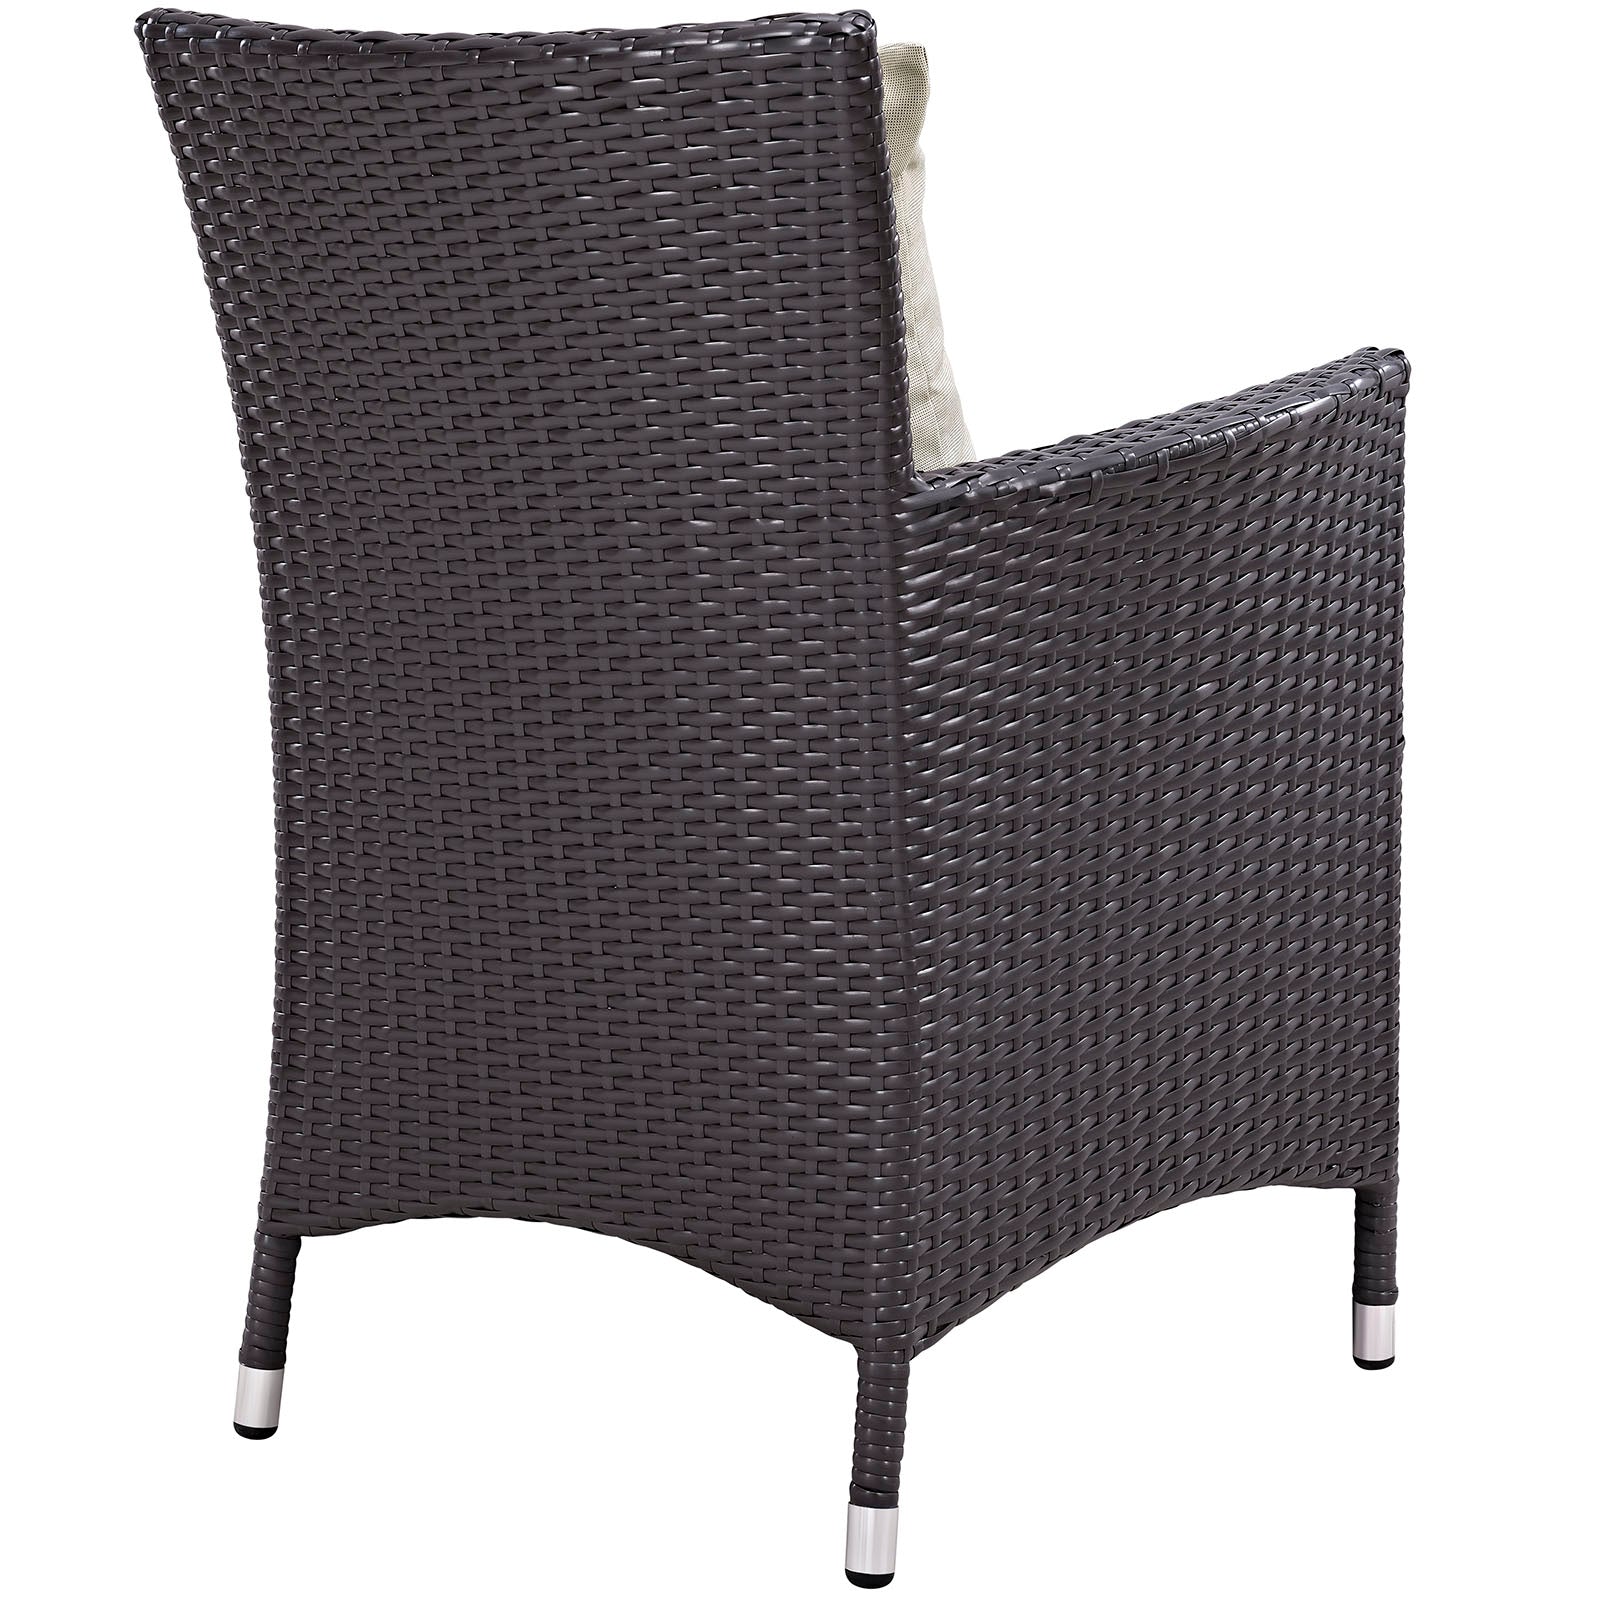 Modway Outdoor Dining Chairs - Convene Outdoor Dining Armchair Espresso & Beige